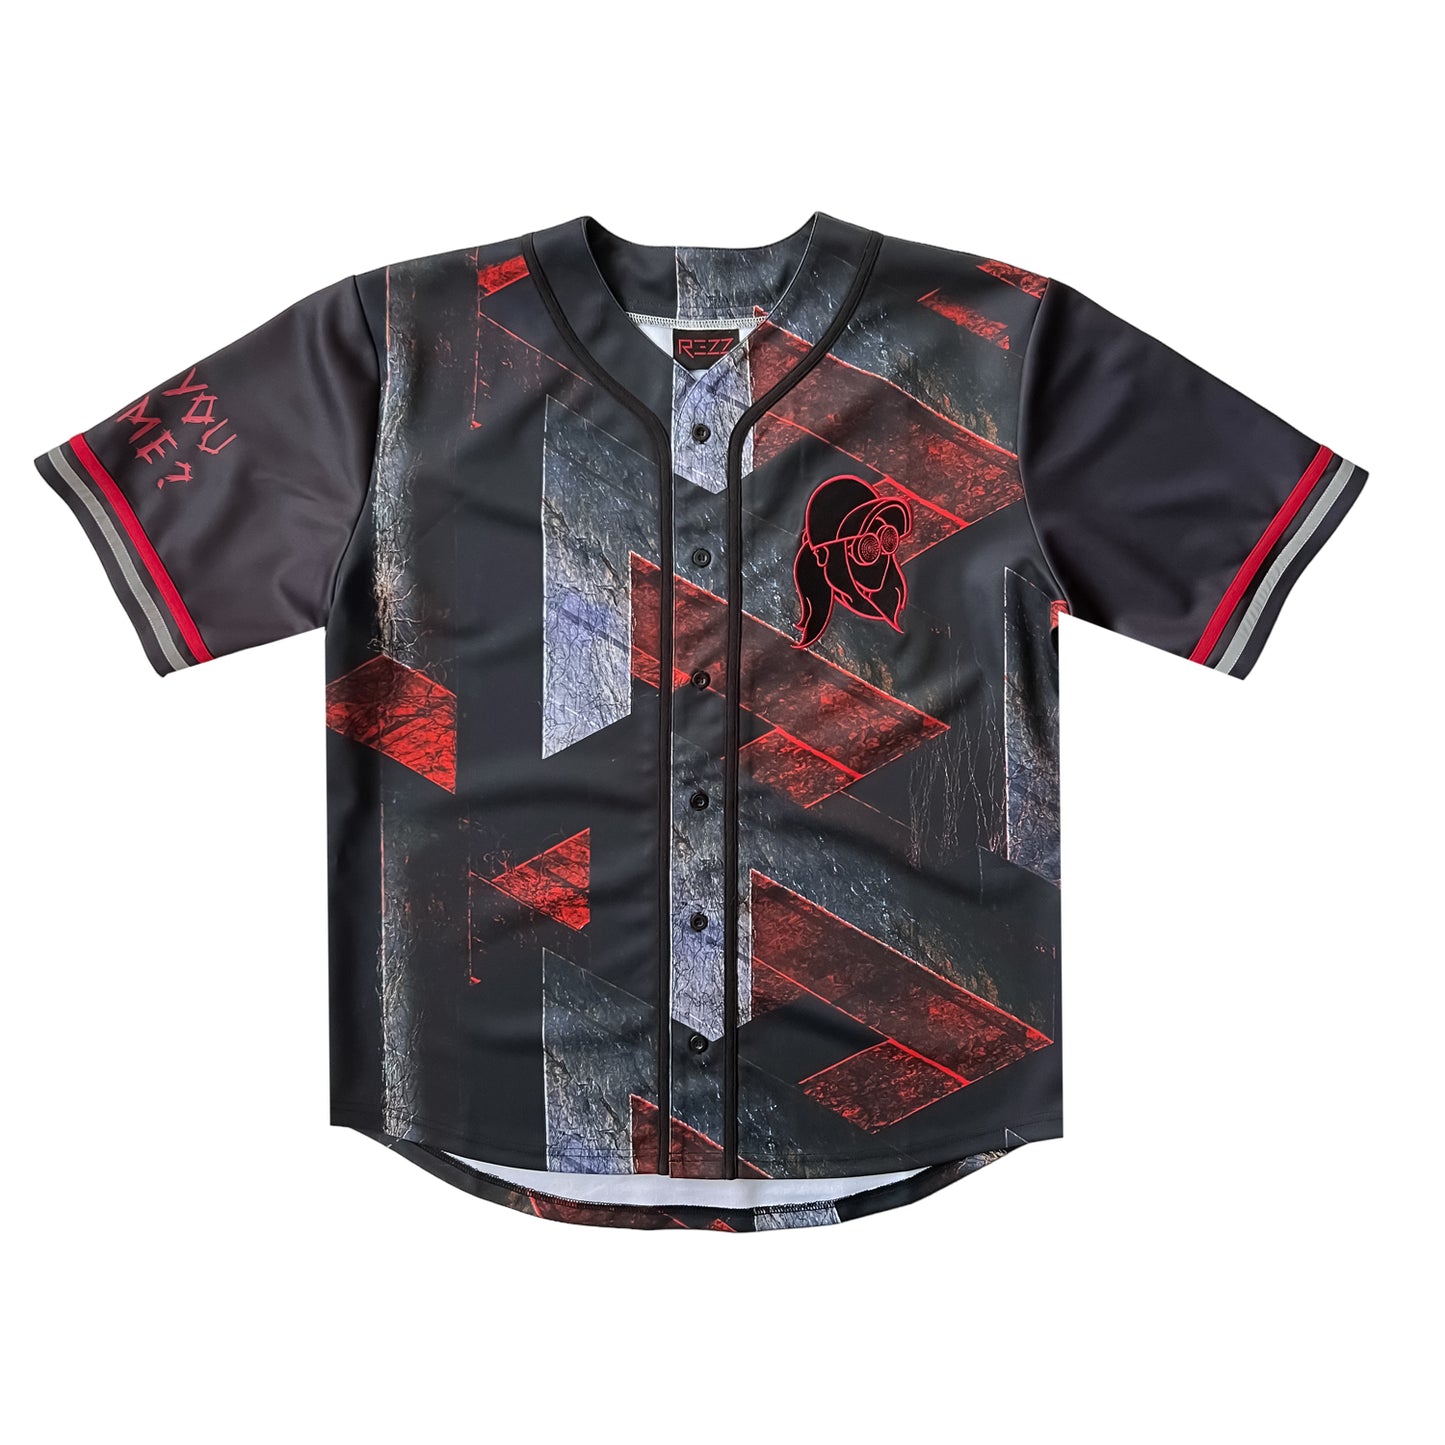 PRE SALE - REZZ - Can You See Me - Baseball Jersey